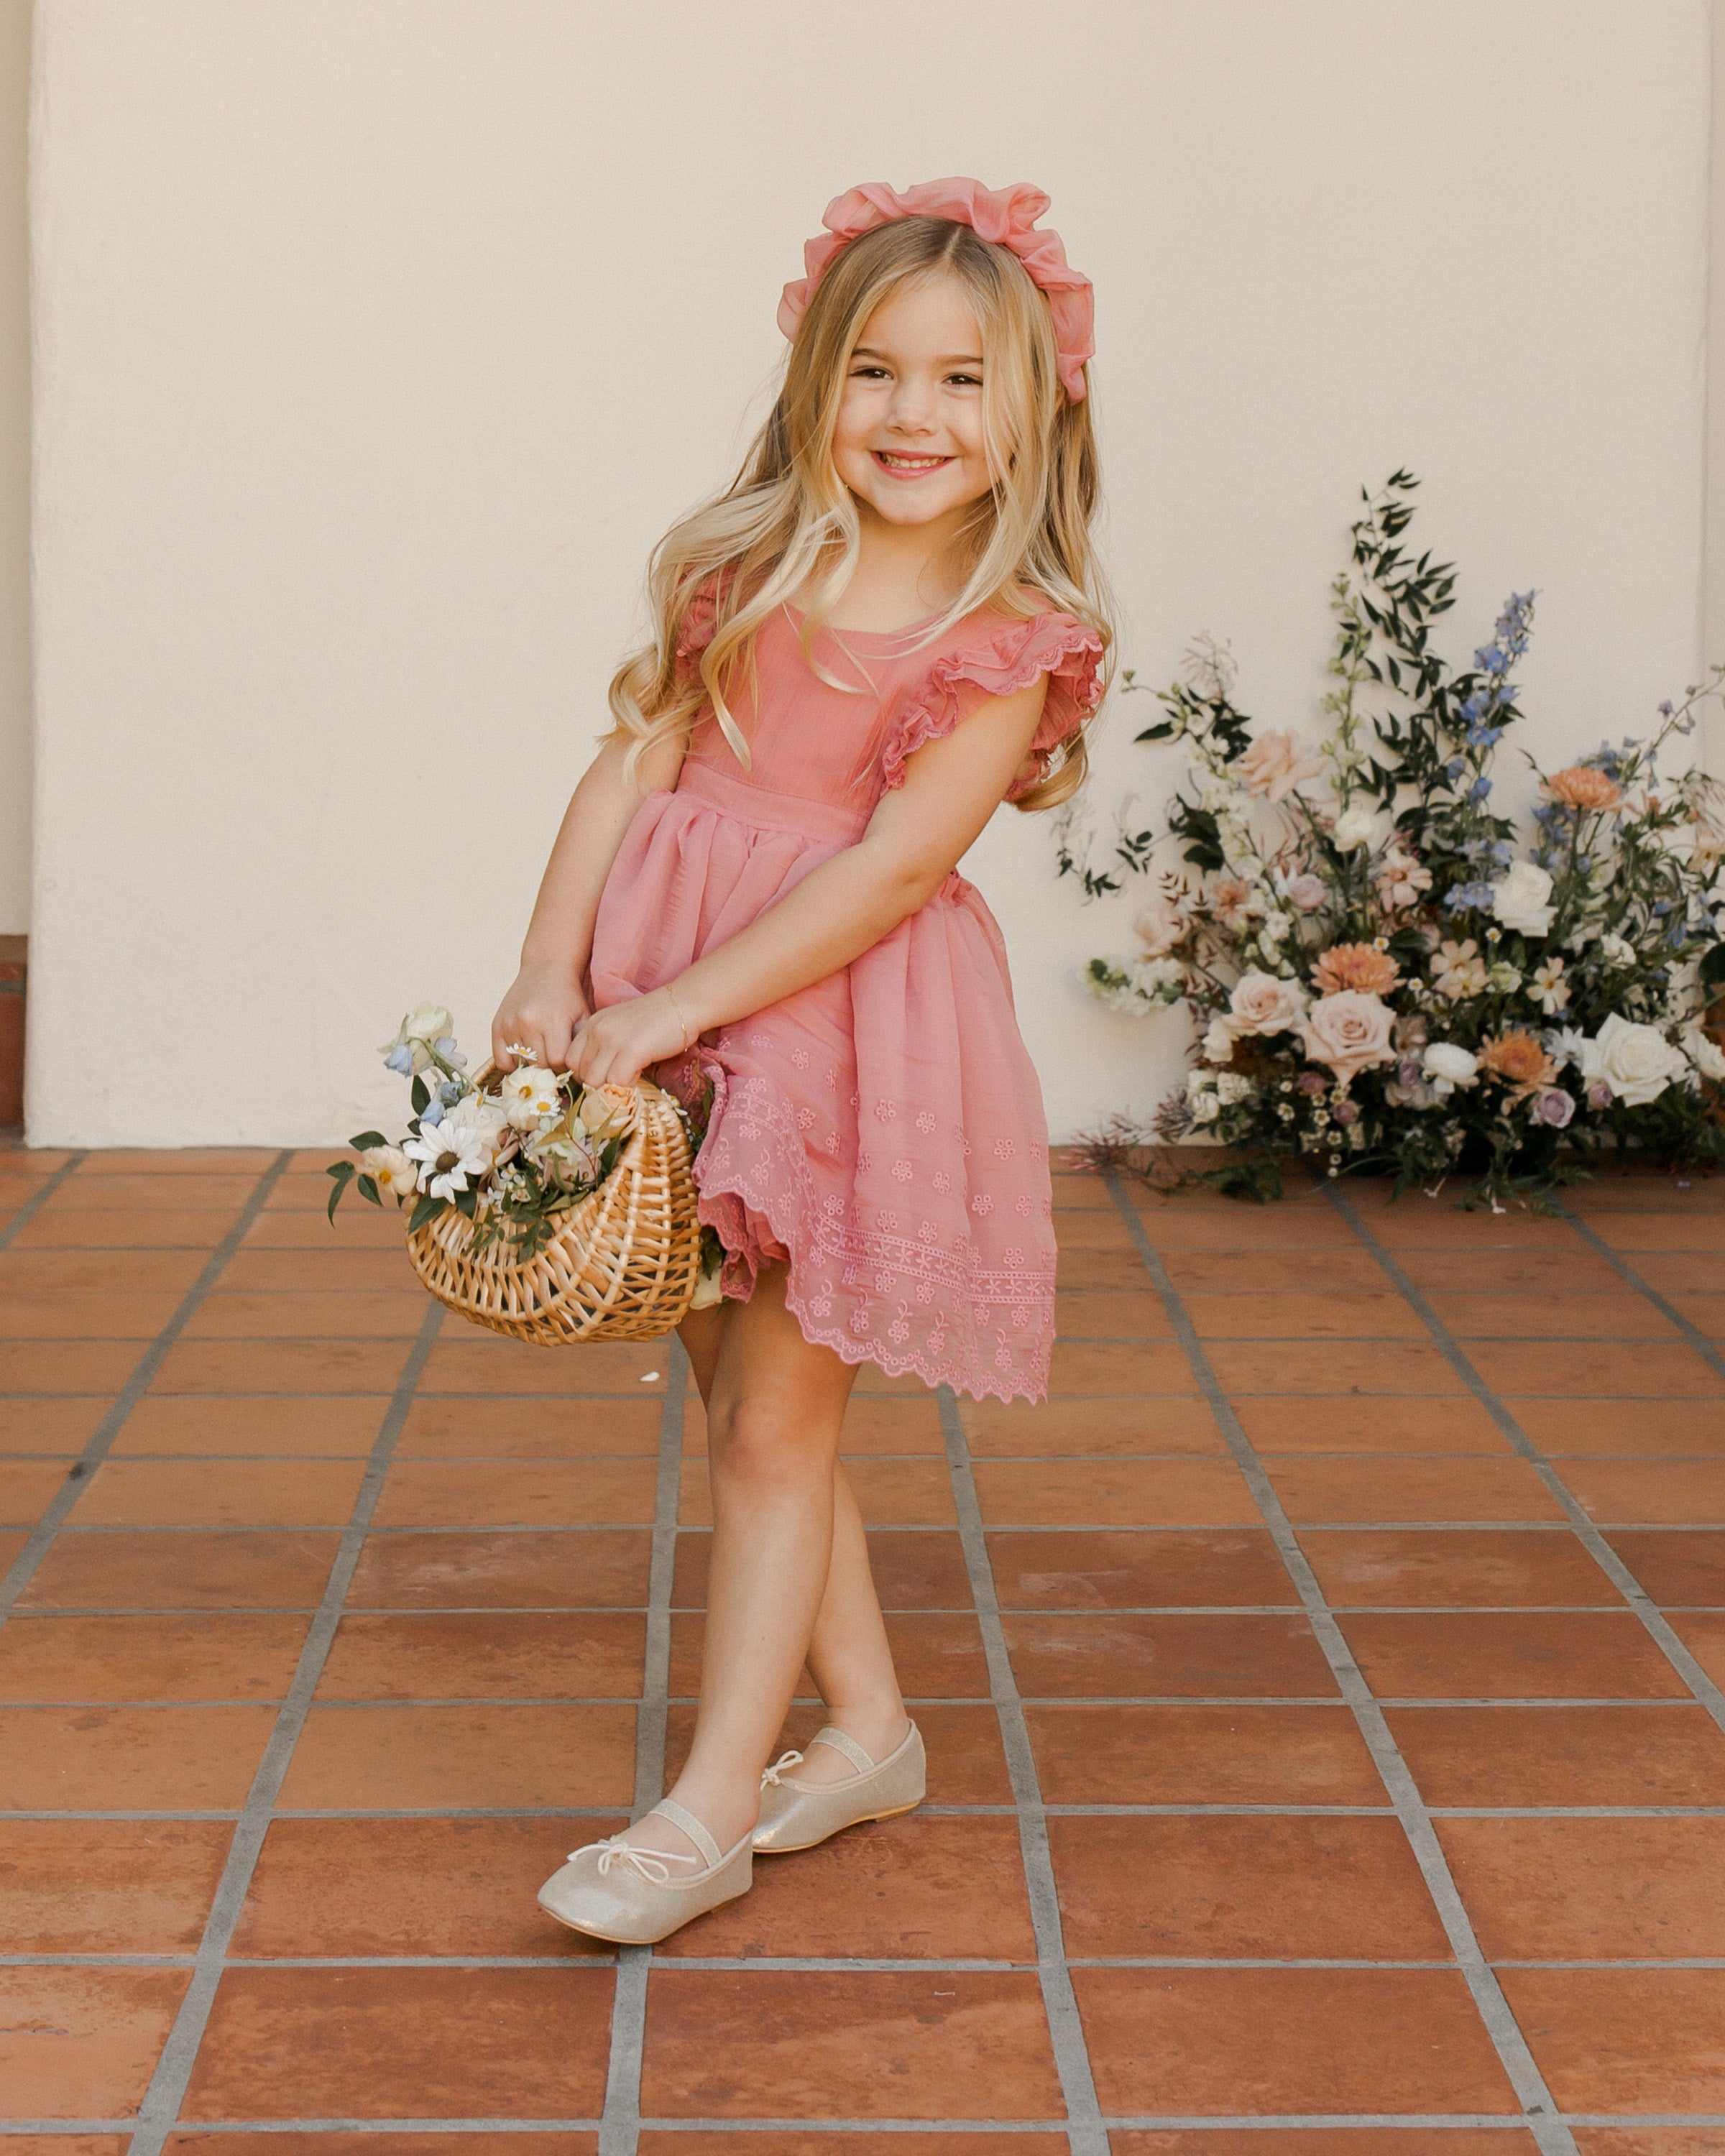 easter outfits for the whole family. - dress cori lynn